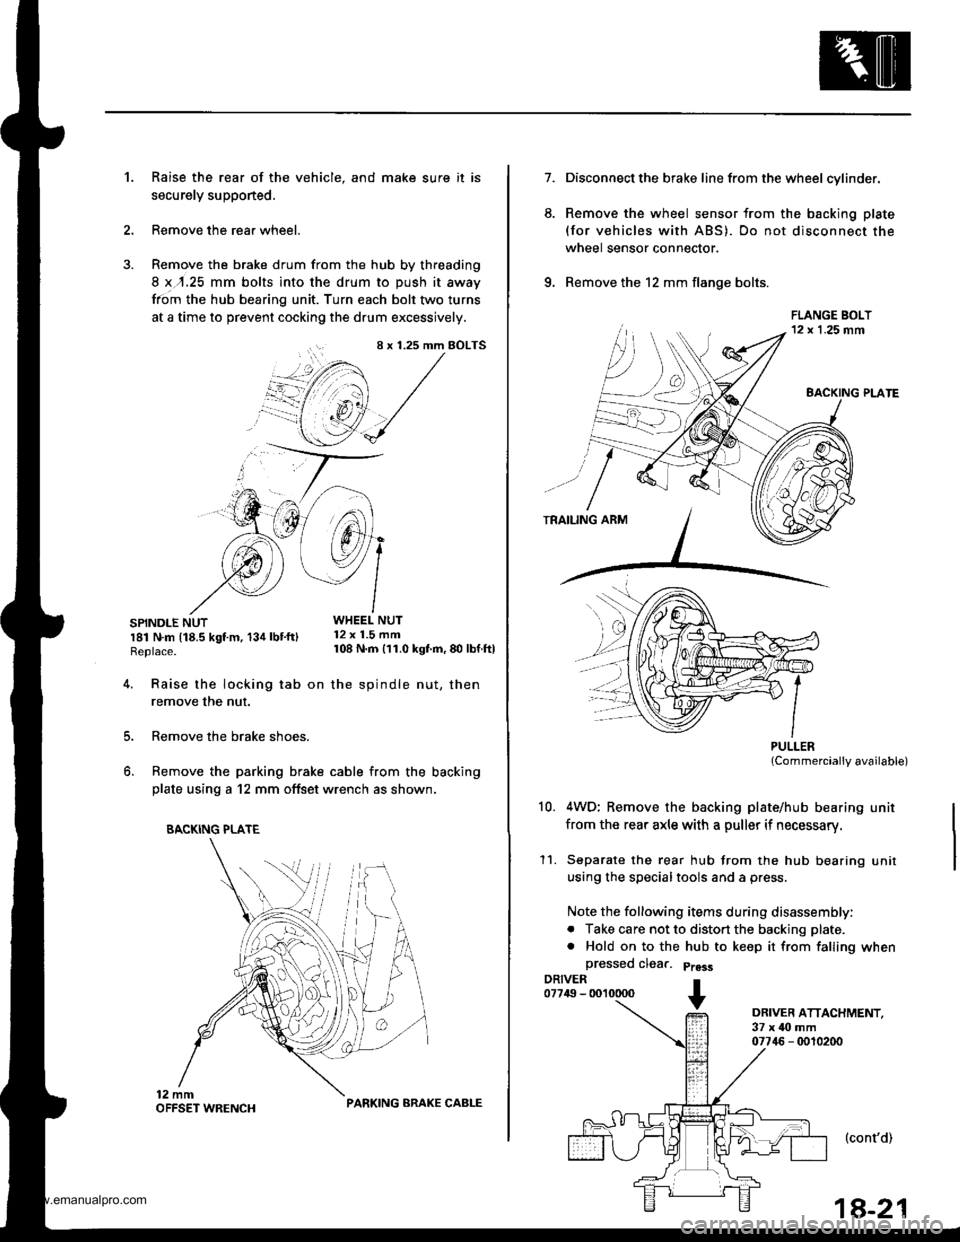 HONDA CR-V 1999 RD1-RD3 / 1.G Workshop Manual 
Raise the rear of the vehicle, and make sure it is
securely supponed.
Remove the rear wheel.
Remove the brake drum from the hub by threading
8 x,r.25 mm bolts into the drum to push it away
from the h